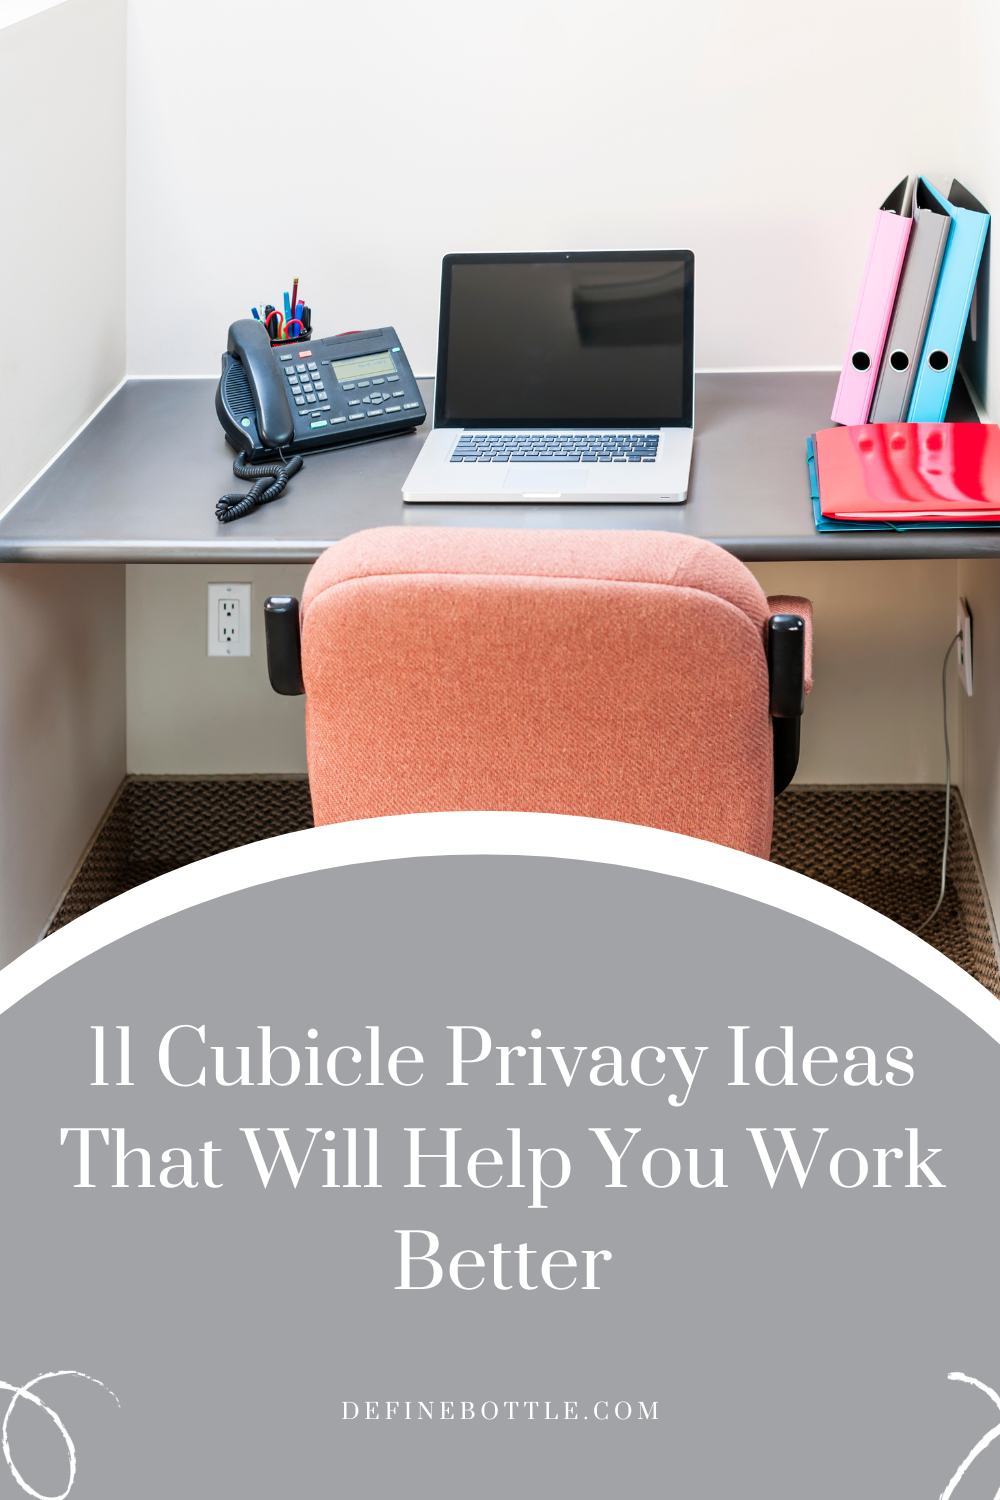 Cubicle Privacy Ideas